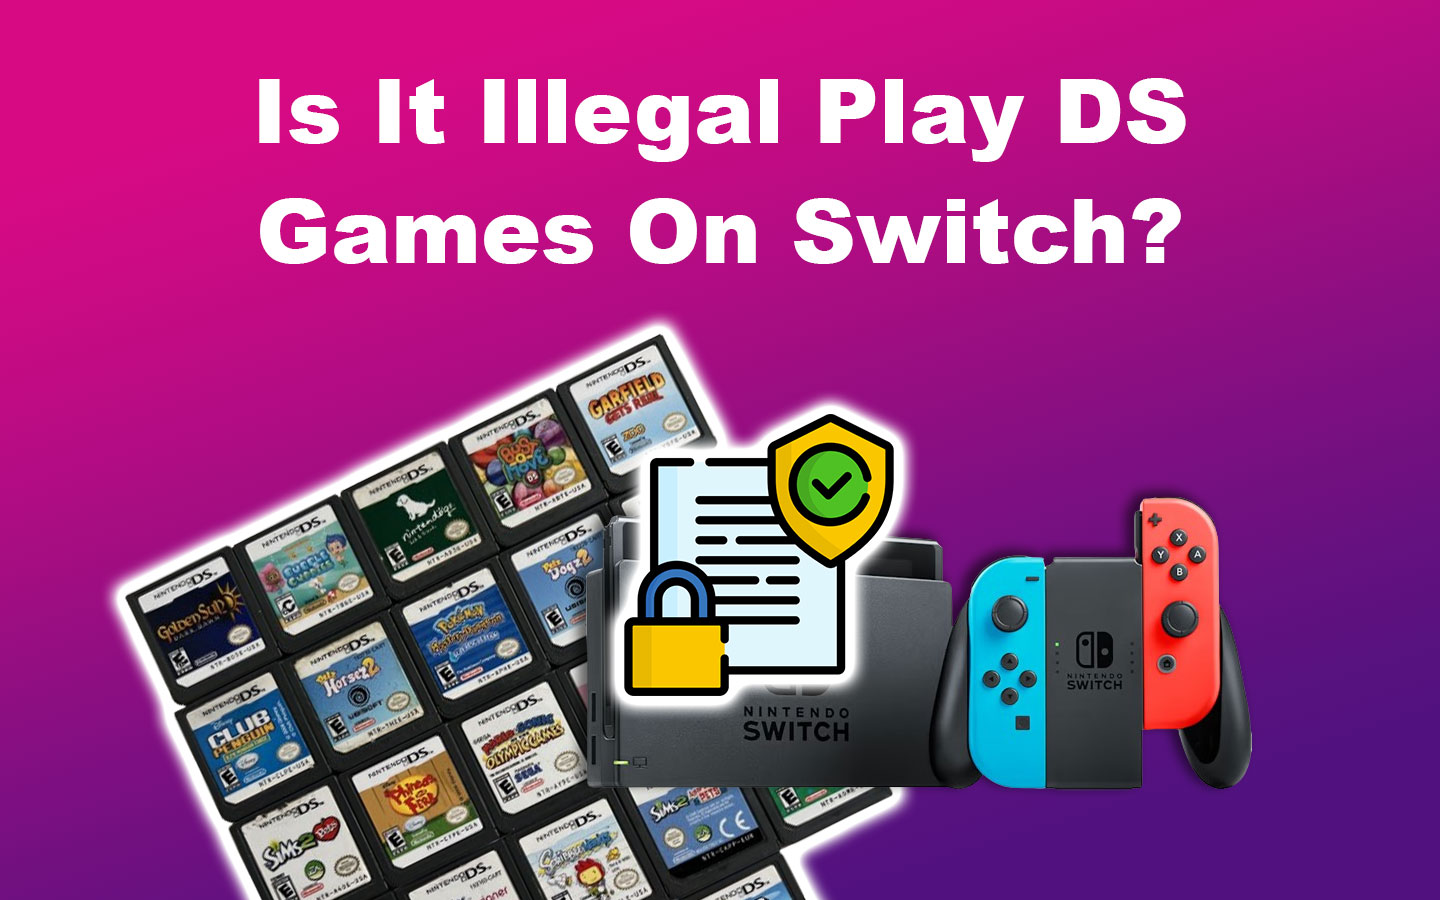 Is It Illegal Play DS Games On Switch